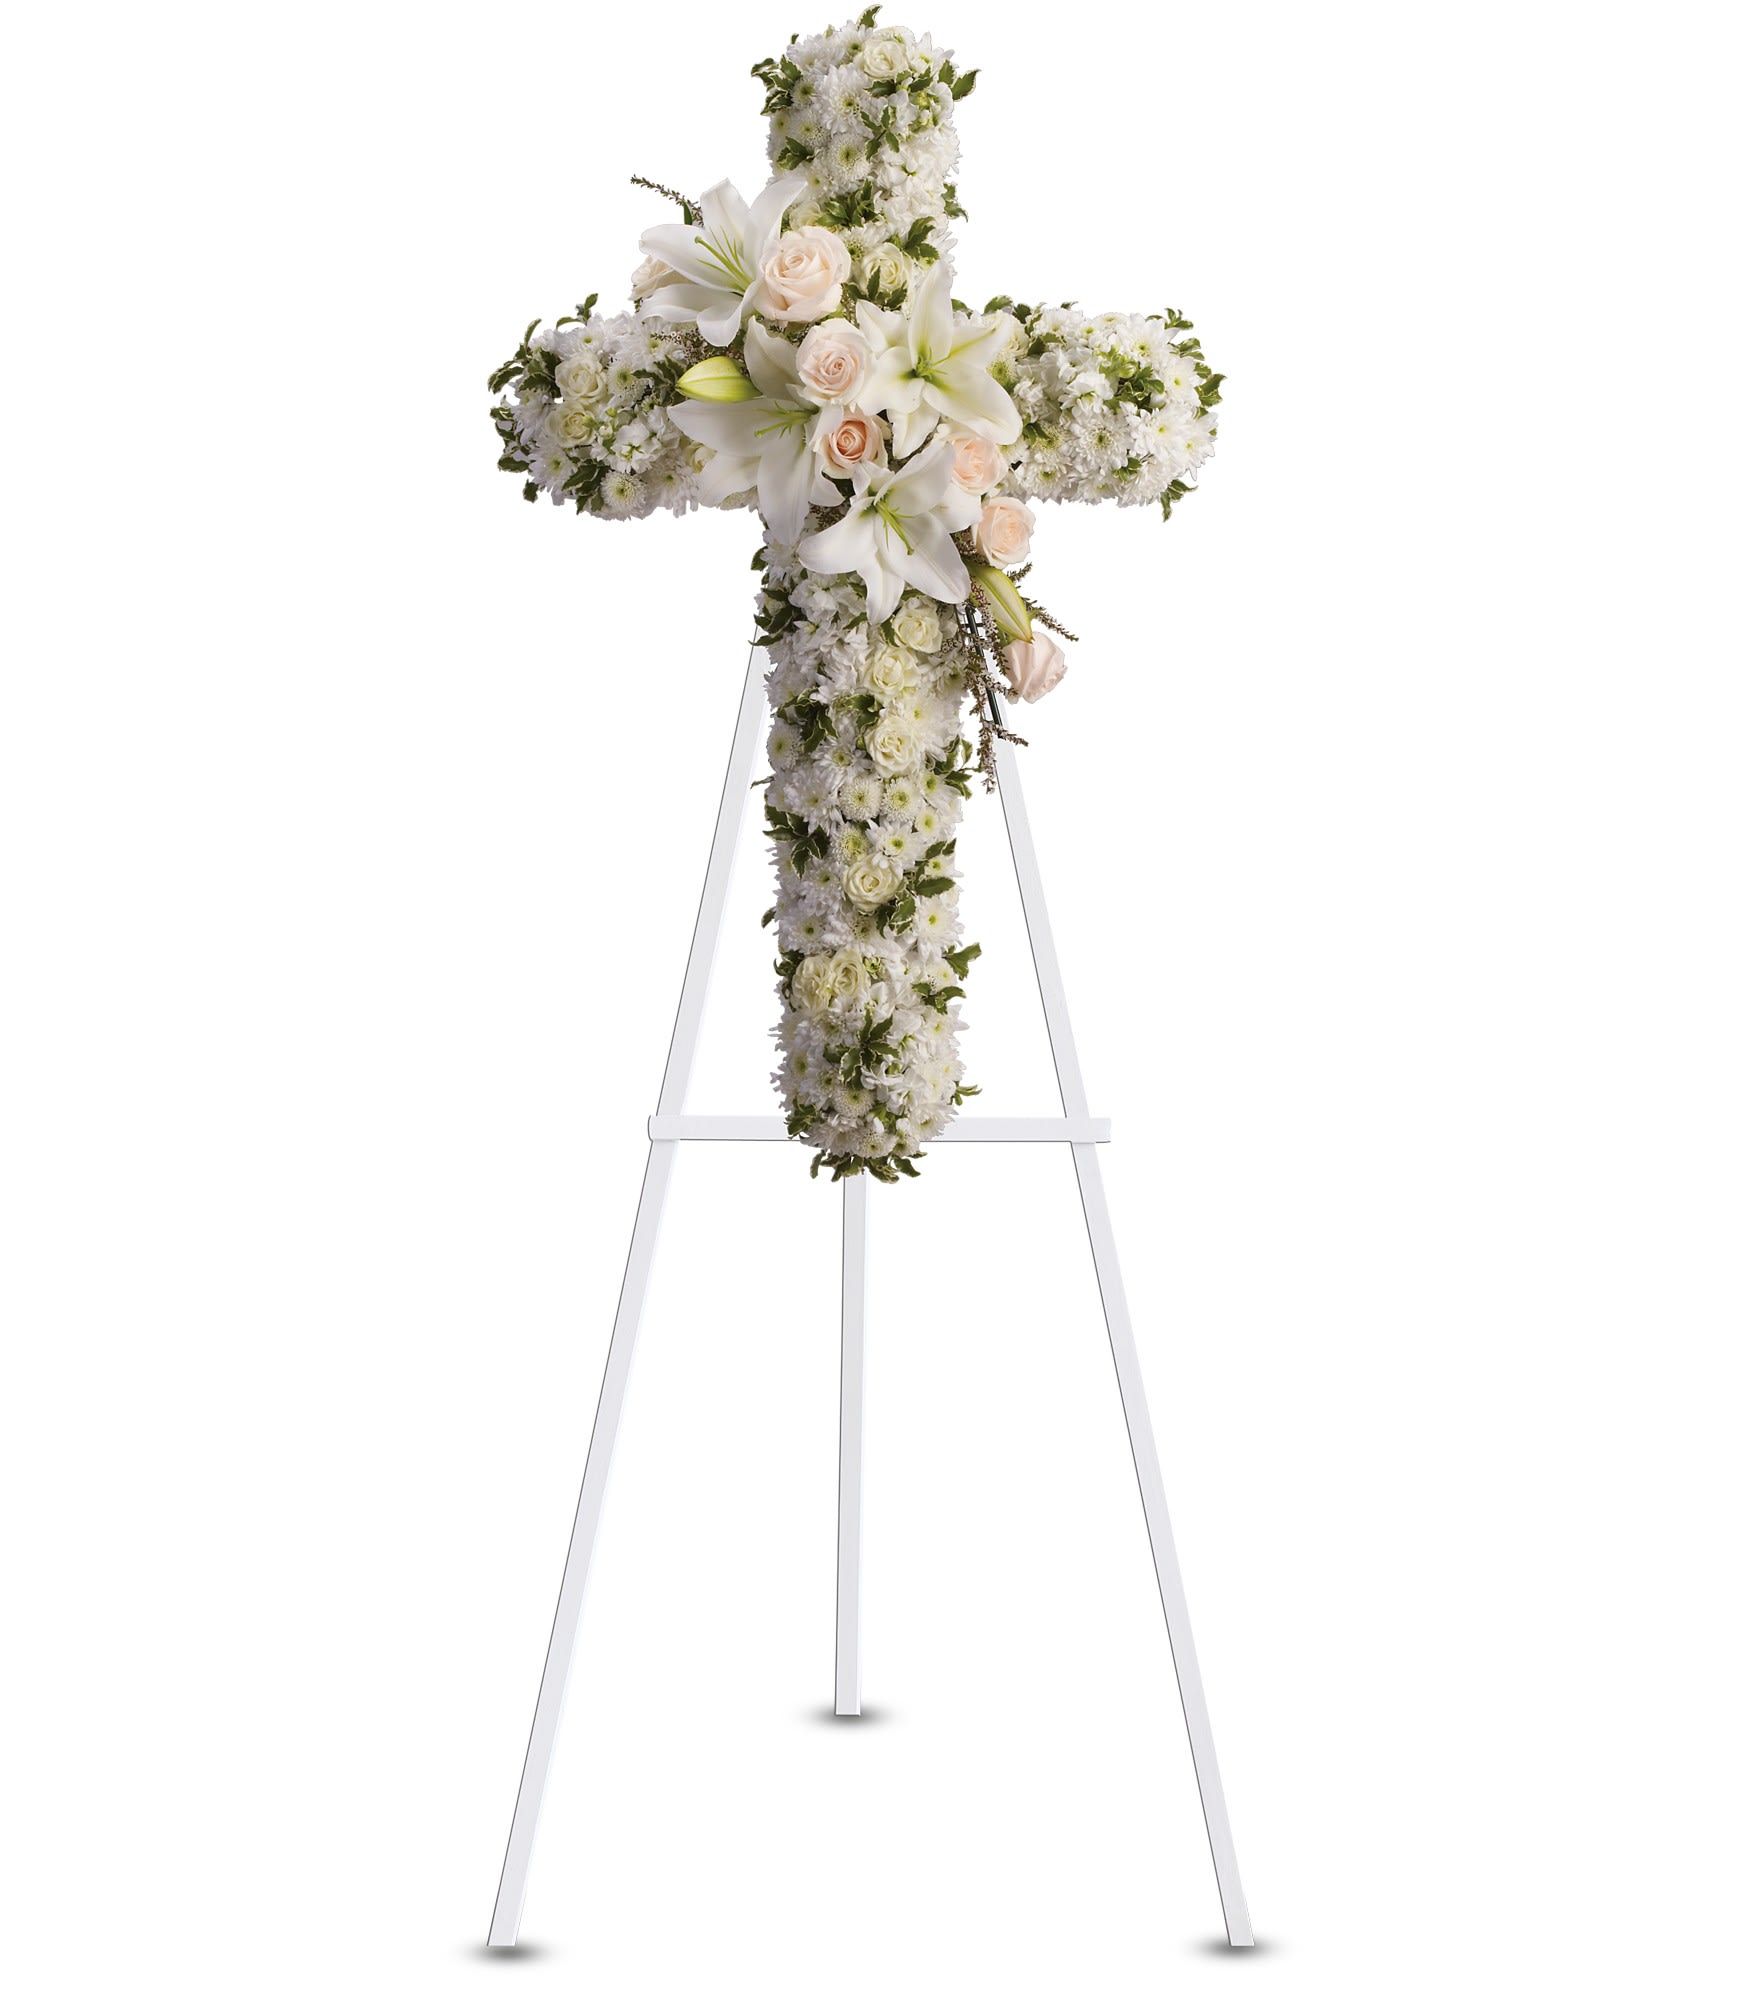 Divine Light by Teleflora - Your message of hope for eternal serenity is delivered ever so elegantly in this graceful cross. Your sincerity will be acknowledged by all who are present.  